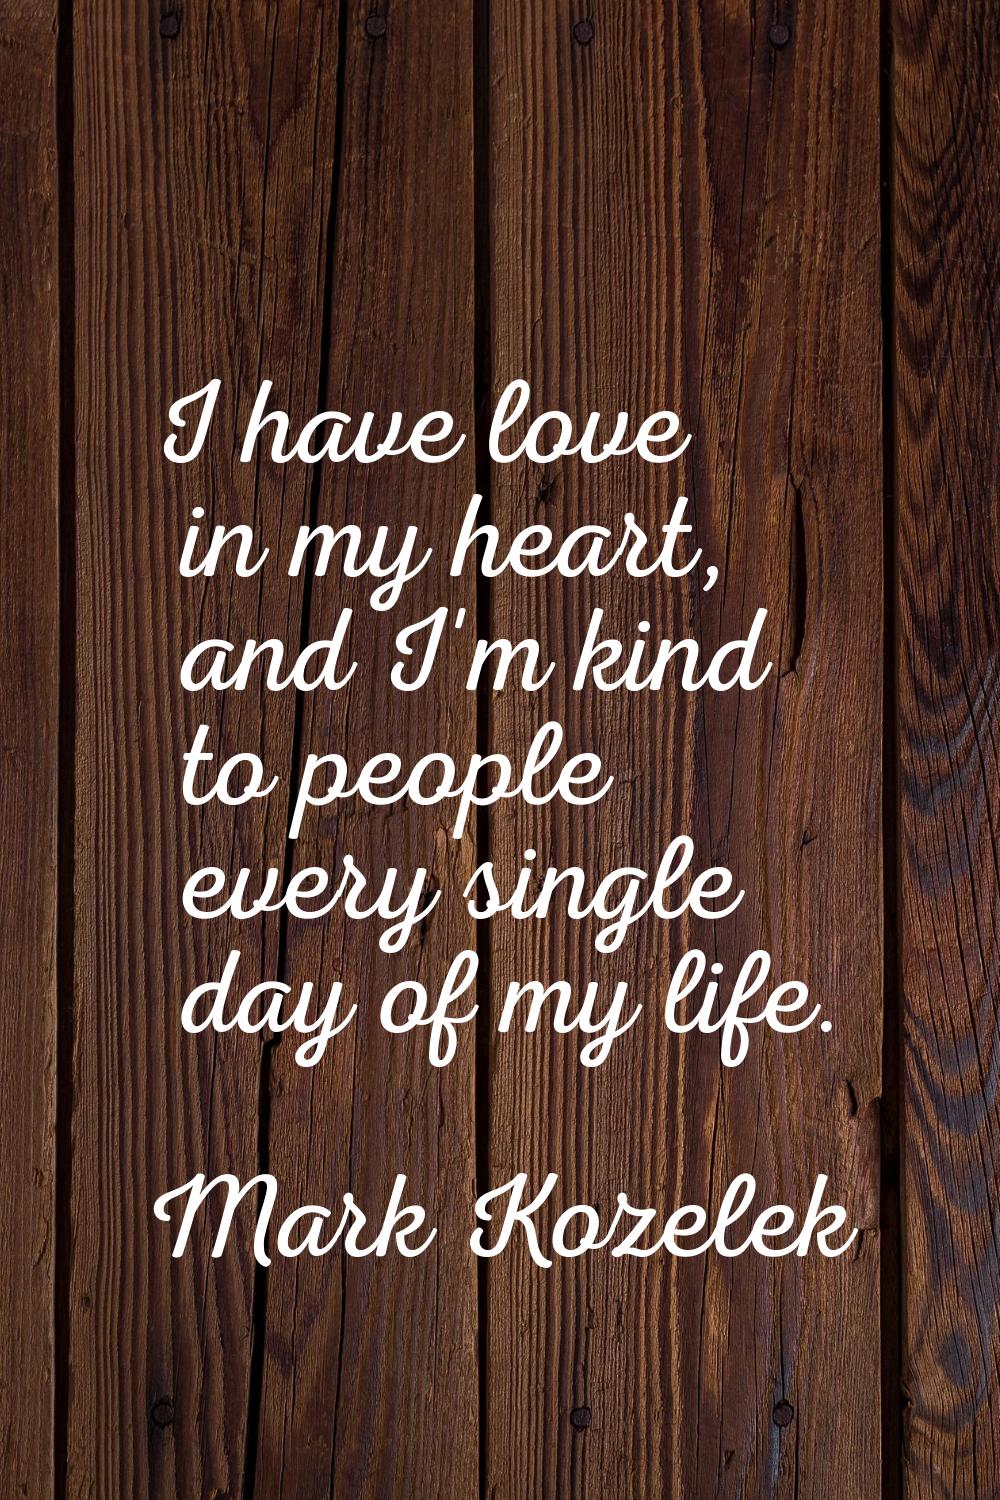 I have love in my heart, and I'm kind to people every single day of my life.